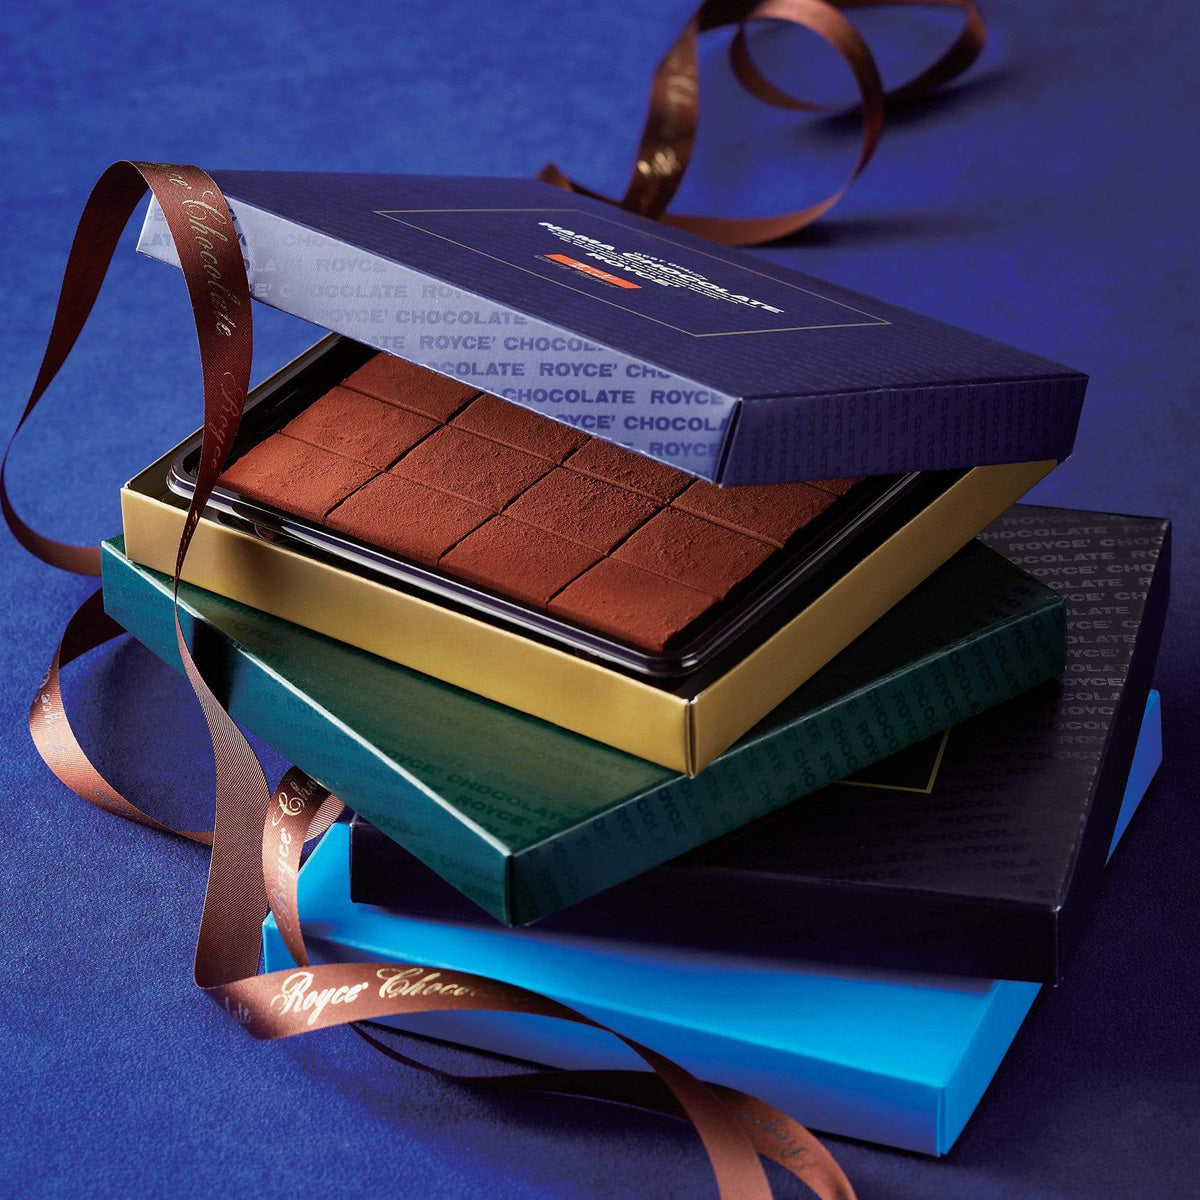 ROYCE' - ROYCE' Signature Nama Chocolate Collection - Image shows a stack of chocolate boxes in the colors of blue, green, black, and light blue. Accent includes a brown ribbon with text saying ROYCE' Chocolate. Background is in blue.